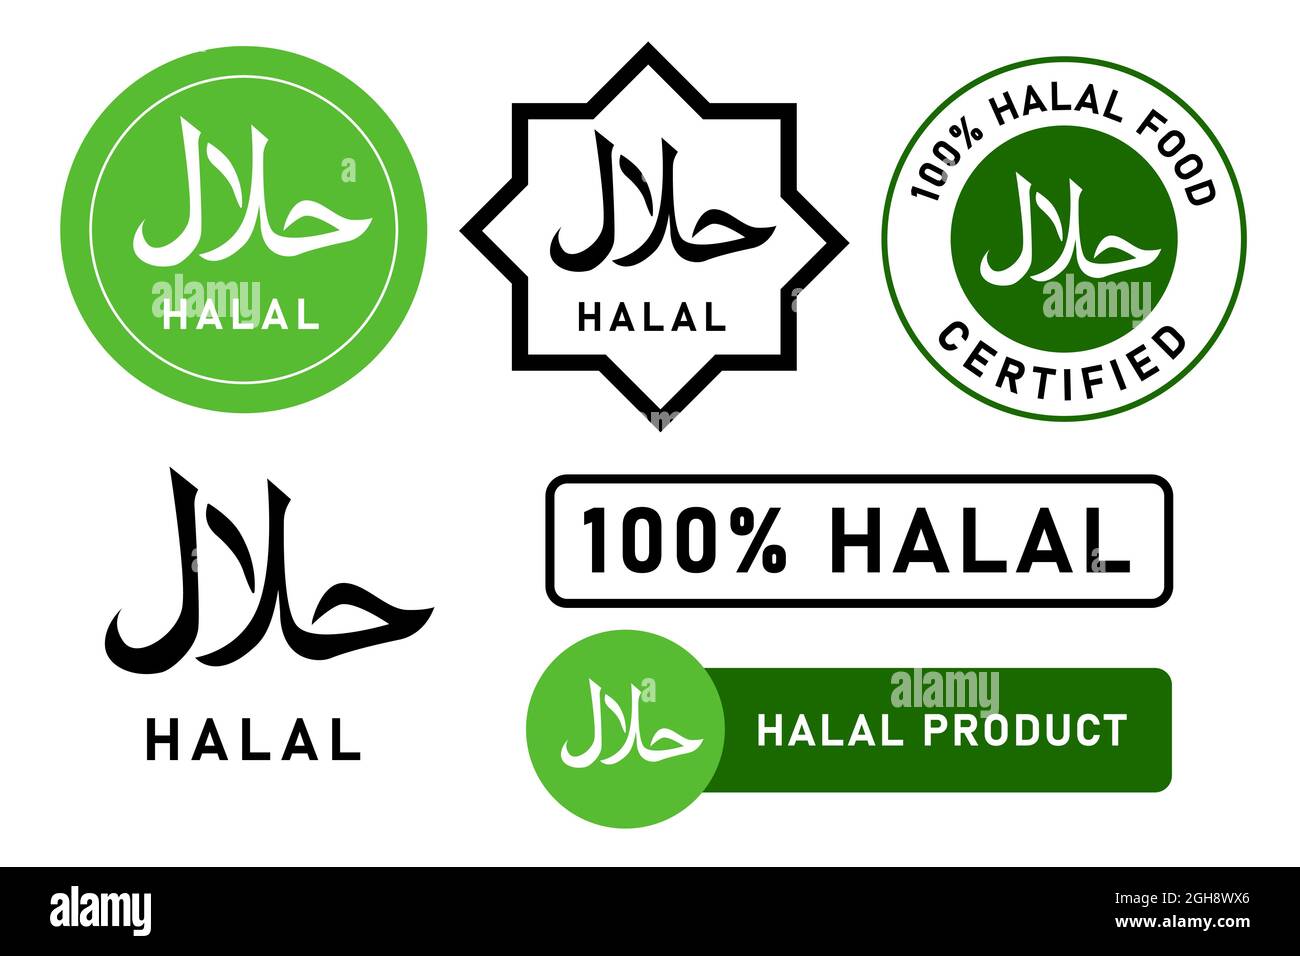 Halal food stamp Islam Muslim approved product badge sticker design set white background Stock Vector